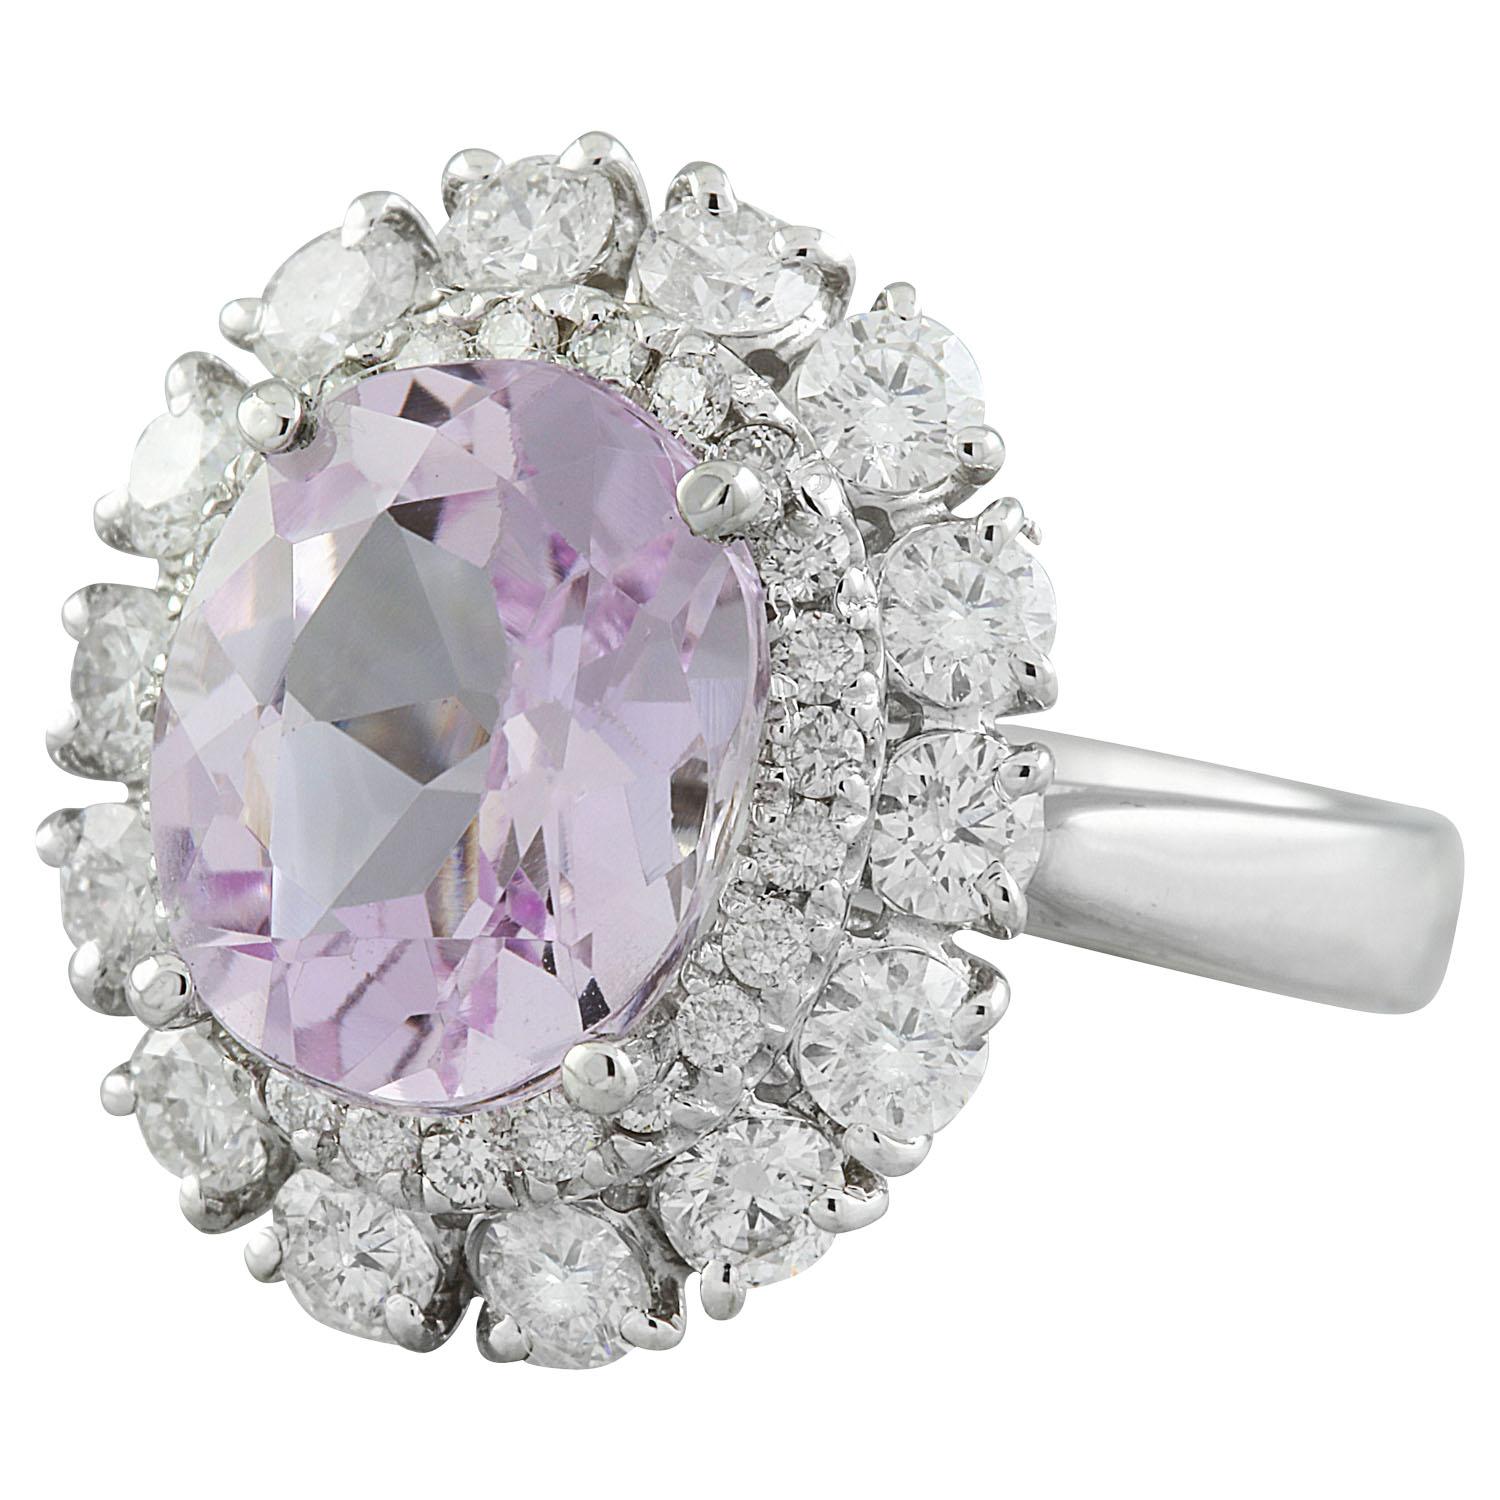 6.20 Carat Natural Kunzite 14 Karat Solid White Gold Diamond Ring
Stamped: 14K 
Total Ring Weight: 5.5 Grams 
Kunzite Weight 4.60 Carat (11.00x9.00 Millimeters)
Diamond Weight: 1.60 carat (F-G Color, VS2-SI1 Clarity)
Face Measures: 16.90x15.40